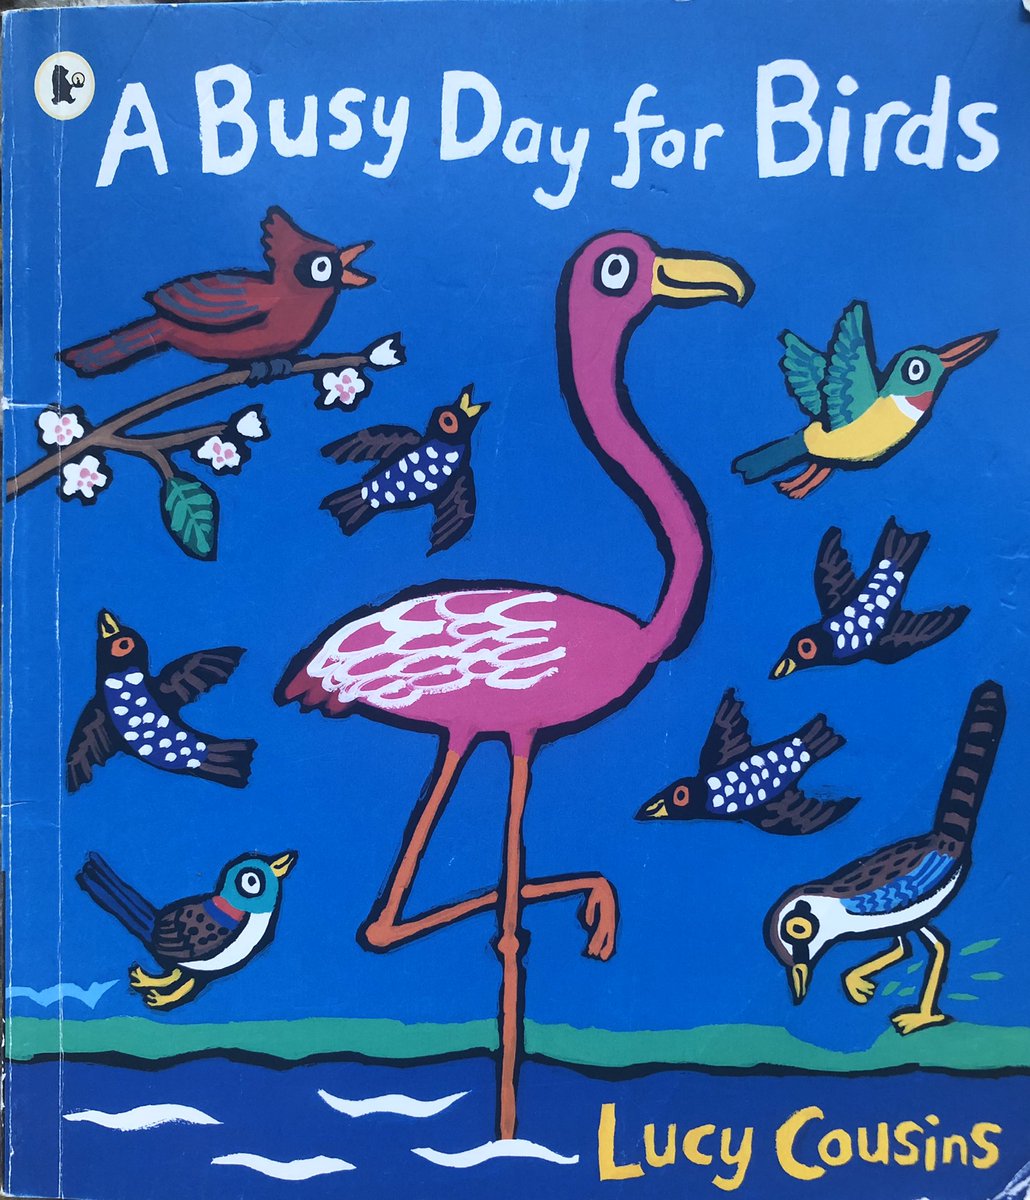 Stretch with Stories this week is the lovely book A Busy Day for Birds 🐦 Get your recorded version from tomorrow for £3 a session or £10 for 4 💜 #abusydayforbirds #stretchwithstories #babyyoga #toddleryoga #childrensyoga #yogatogether #babybonding